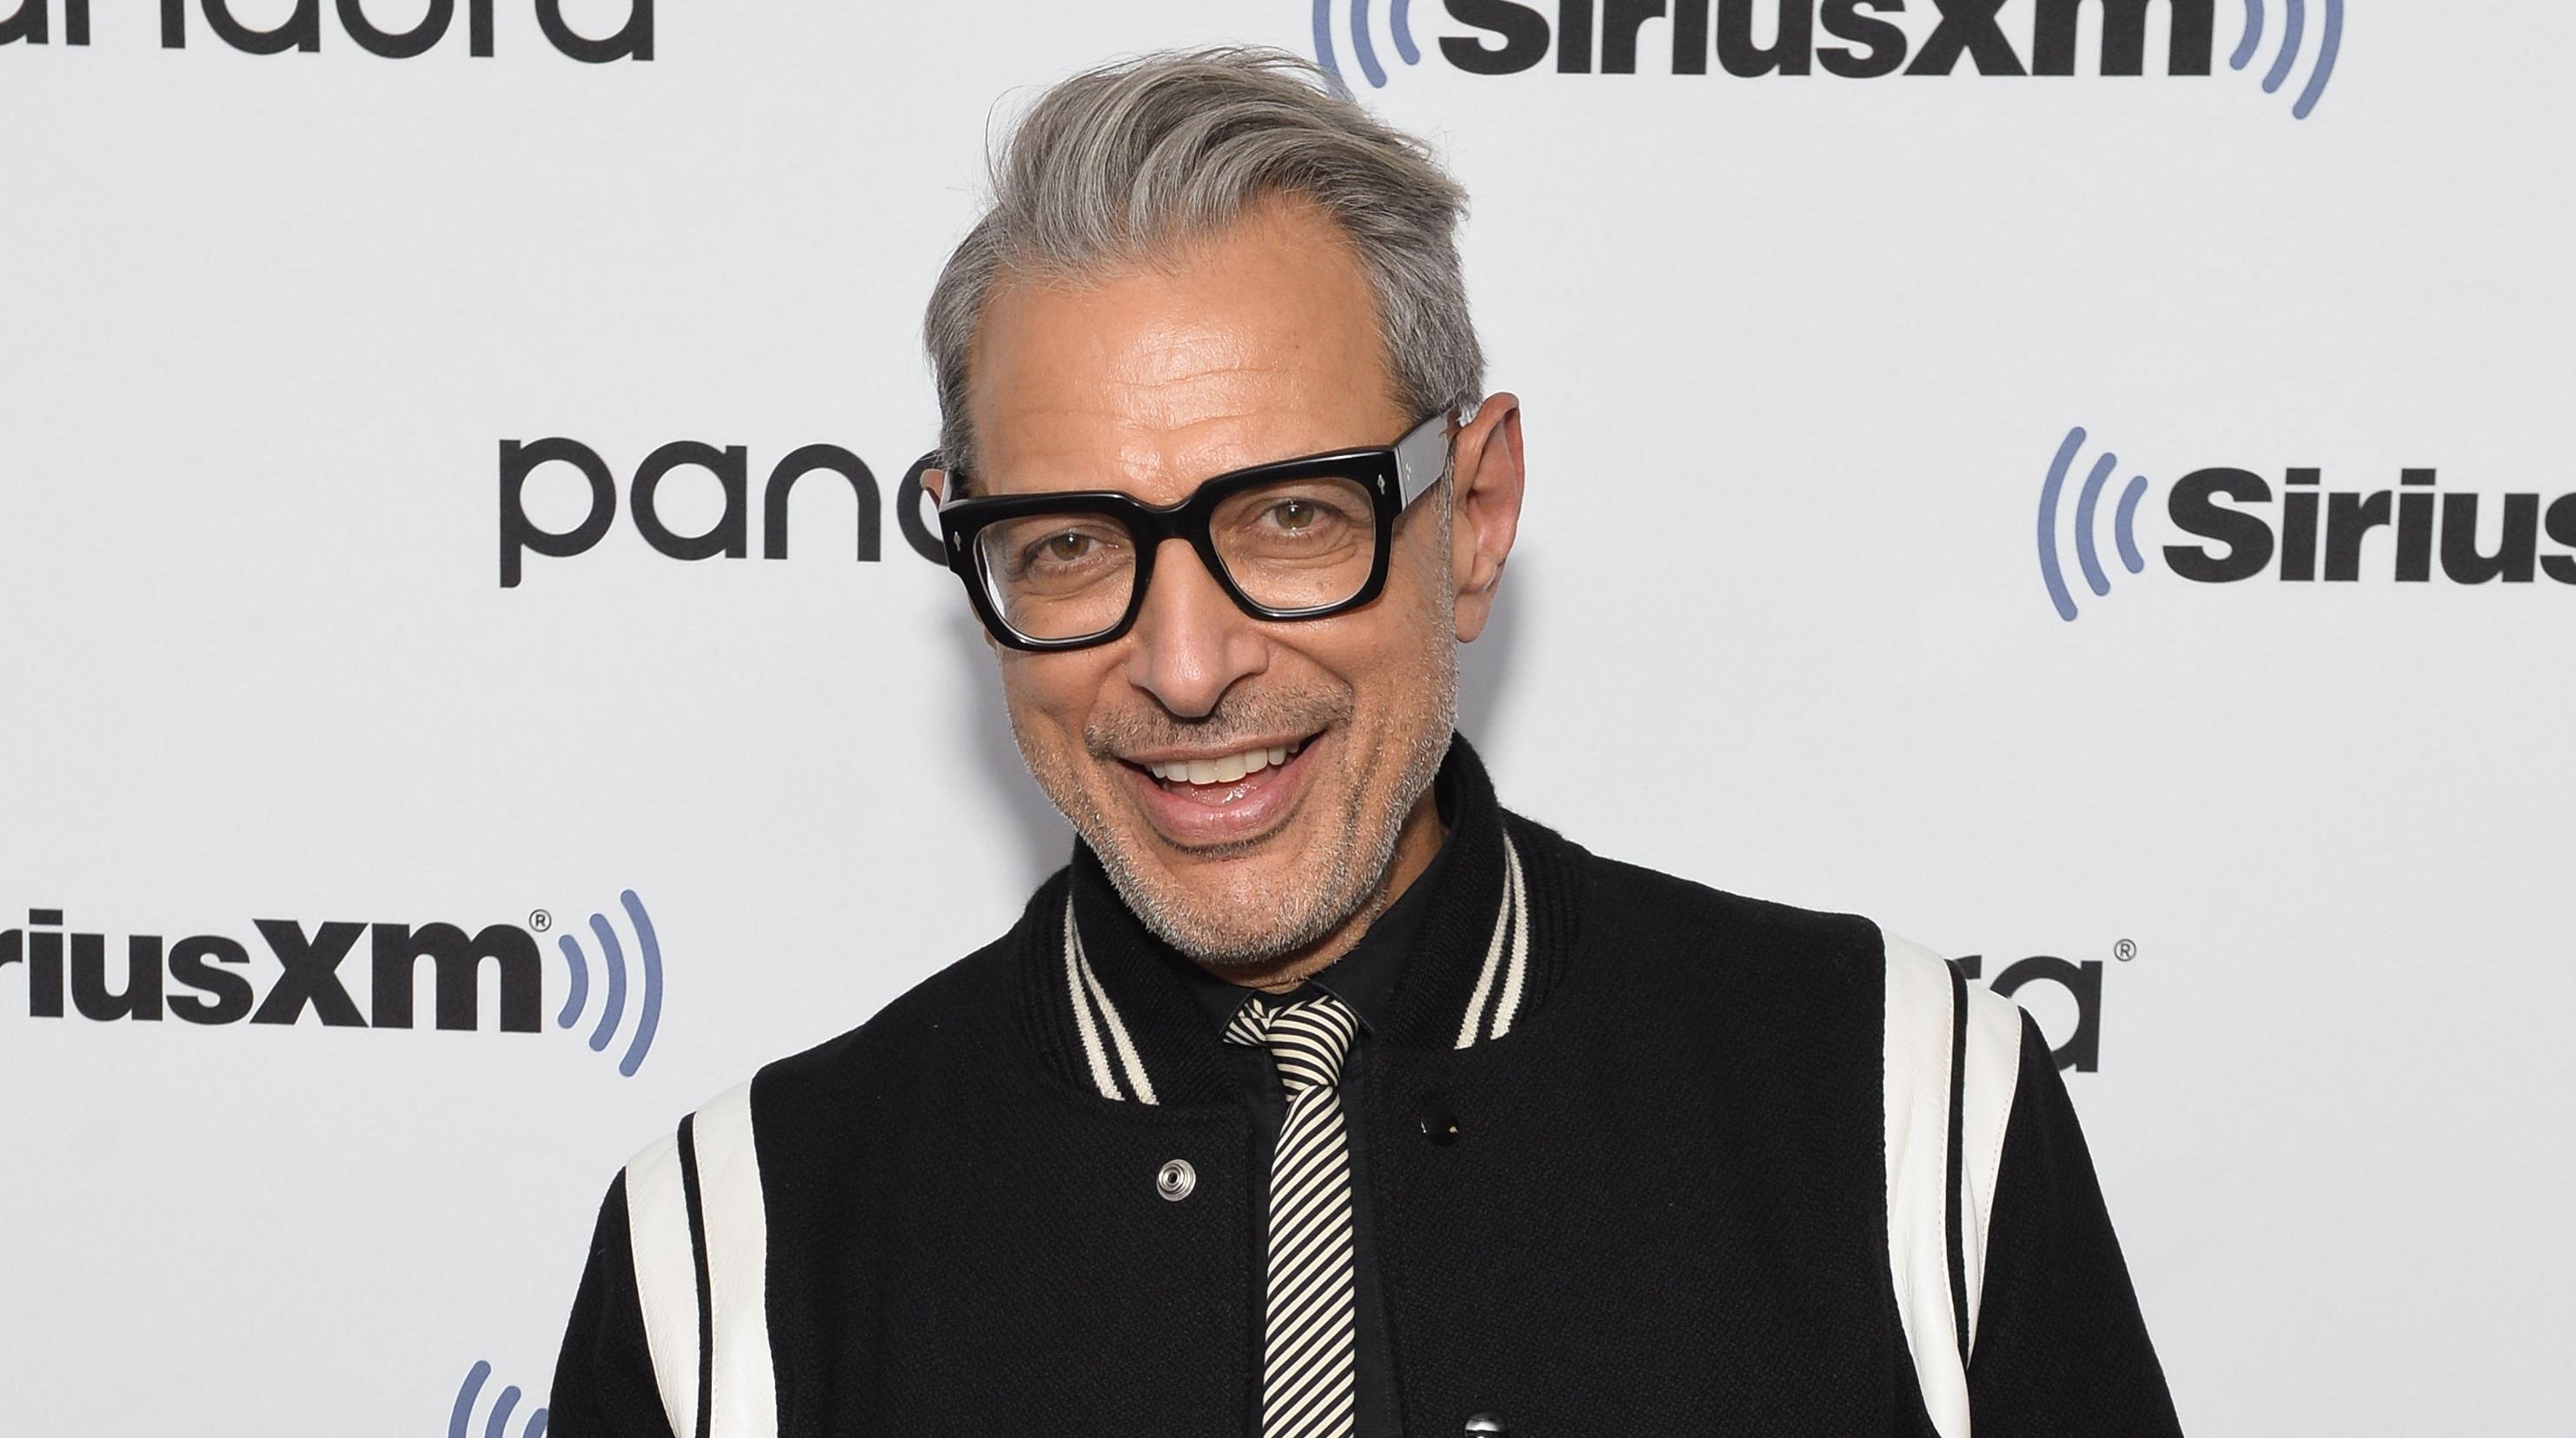 Jeff Goldblum joins HBO Max's Search Party, which seems like a perfect union of weirdos